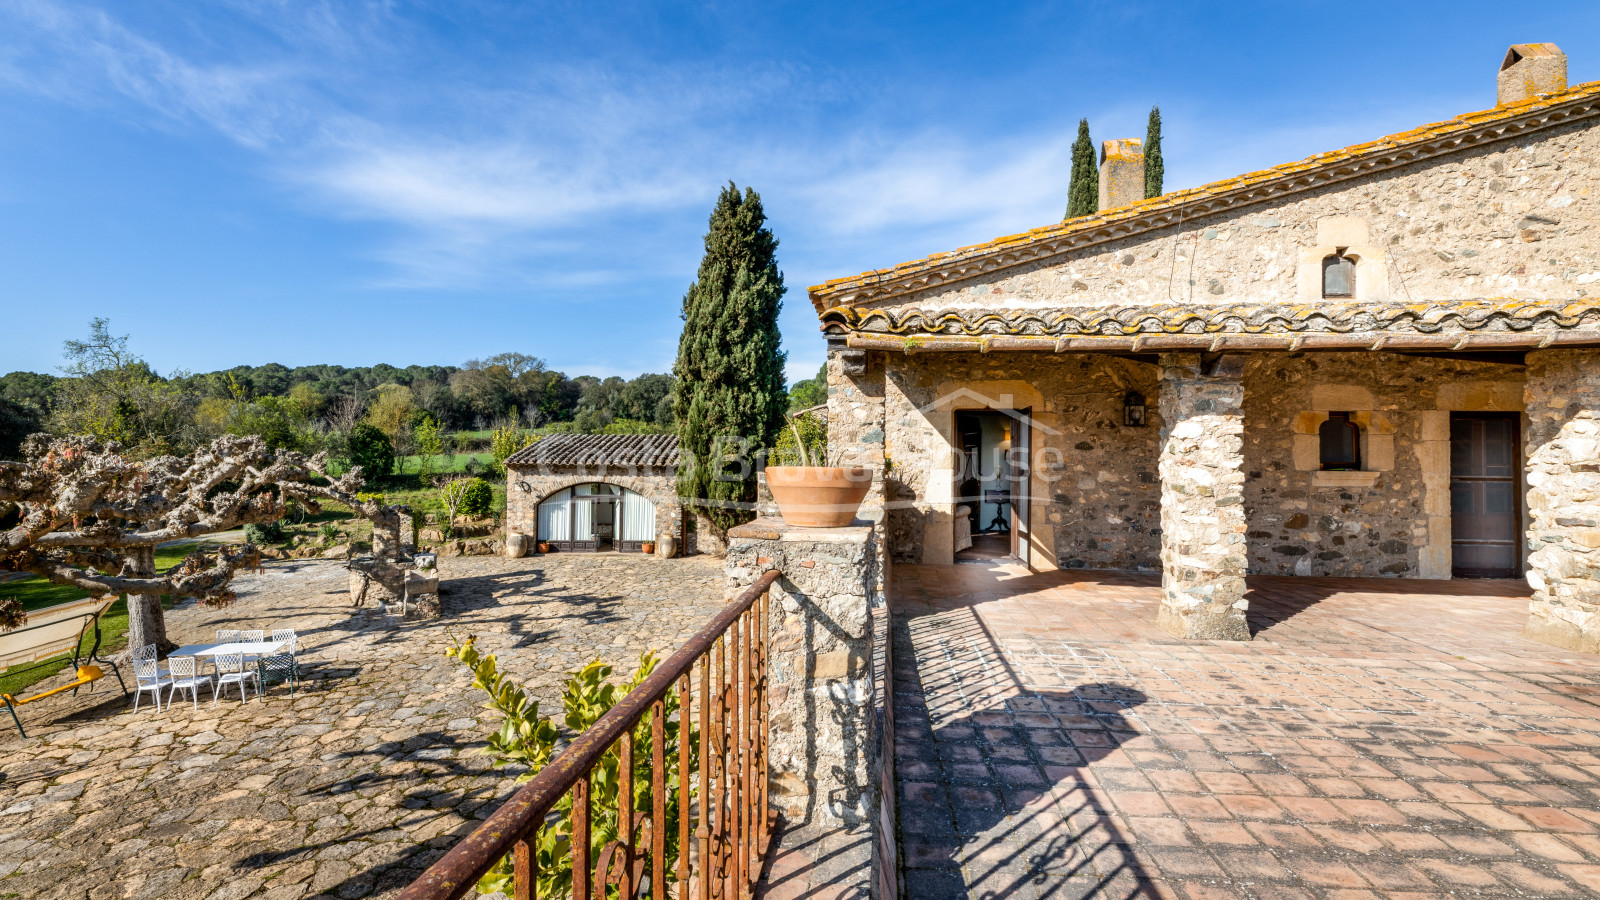 Stately 17th century Catalan country house for sale in Cruilles with 19 ha of land and outbuildings